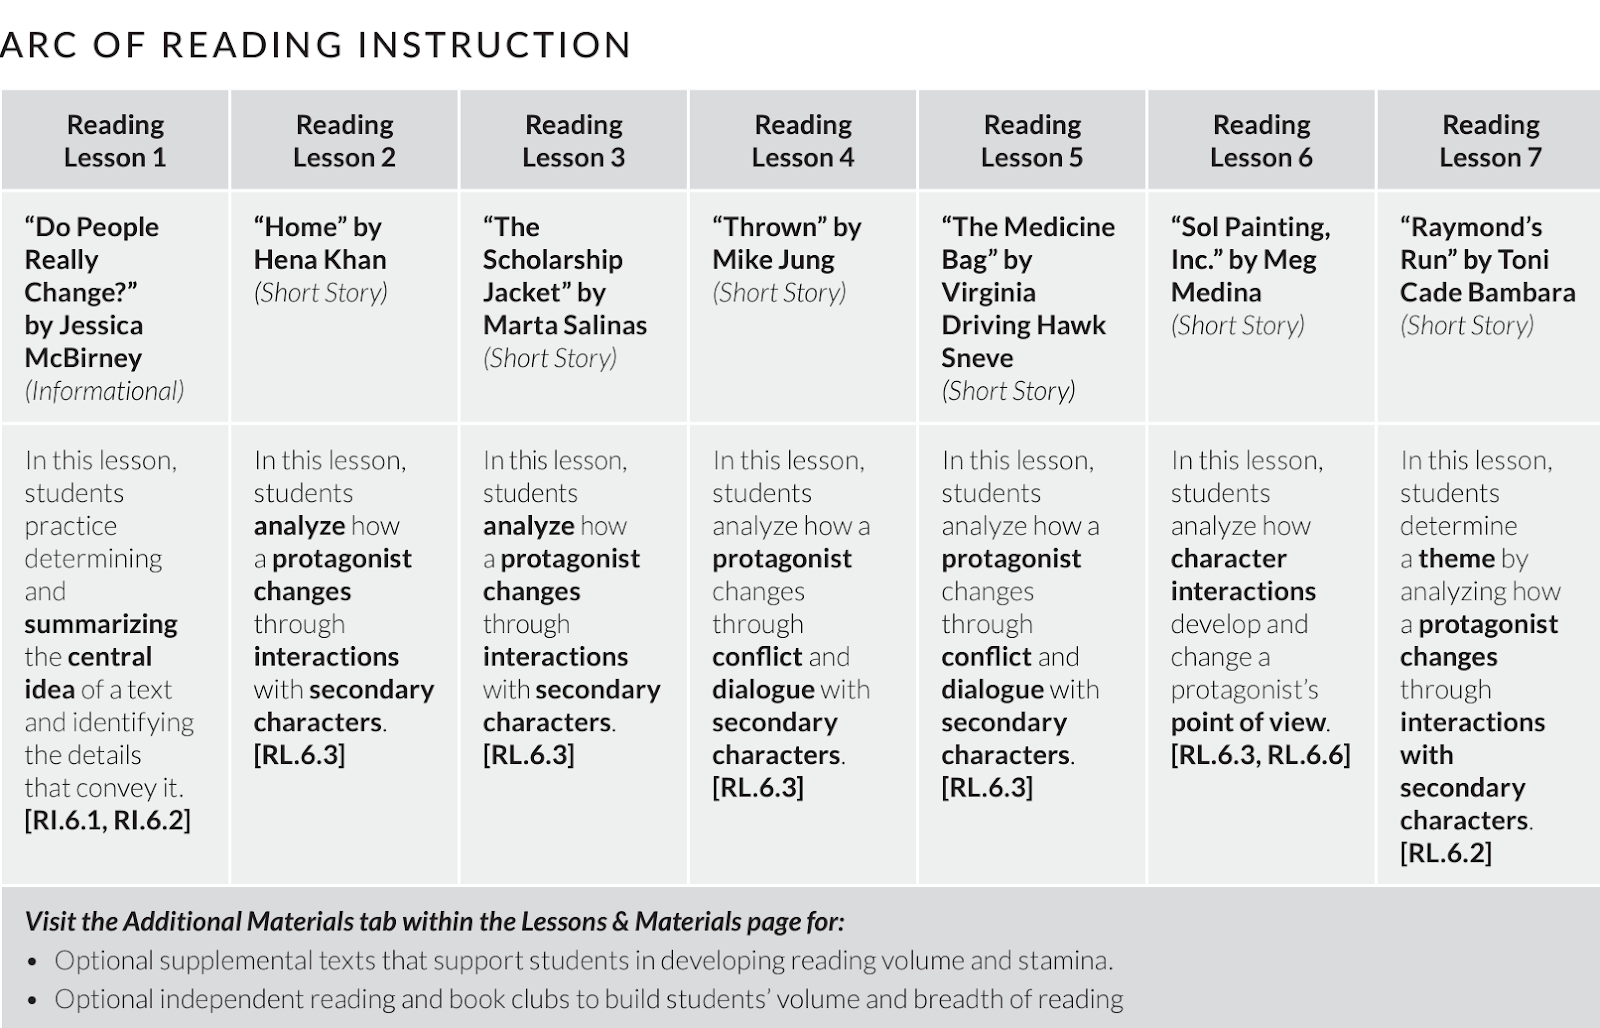 CommonLit reading lessons that serve as windows and mirrors.